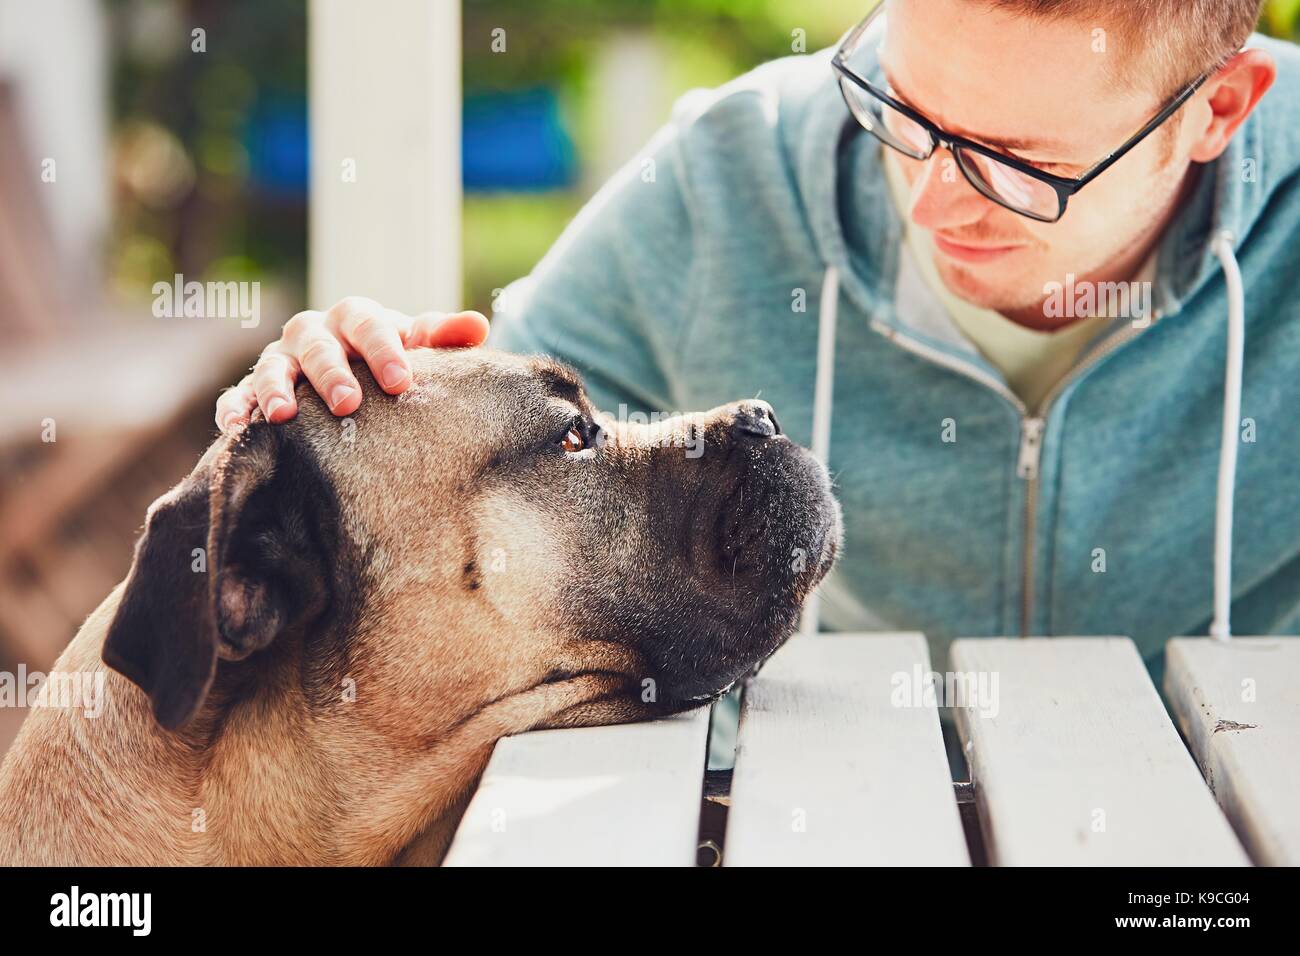 Devoted look of the huge dog. Friendship between young man and cane corso dog. Stock Photo